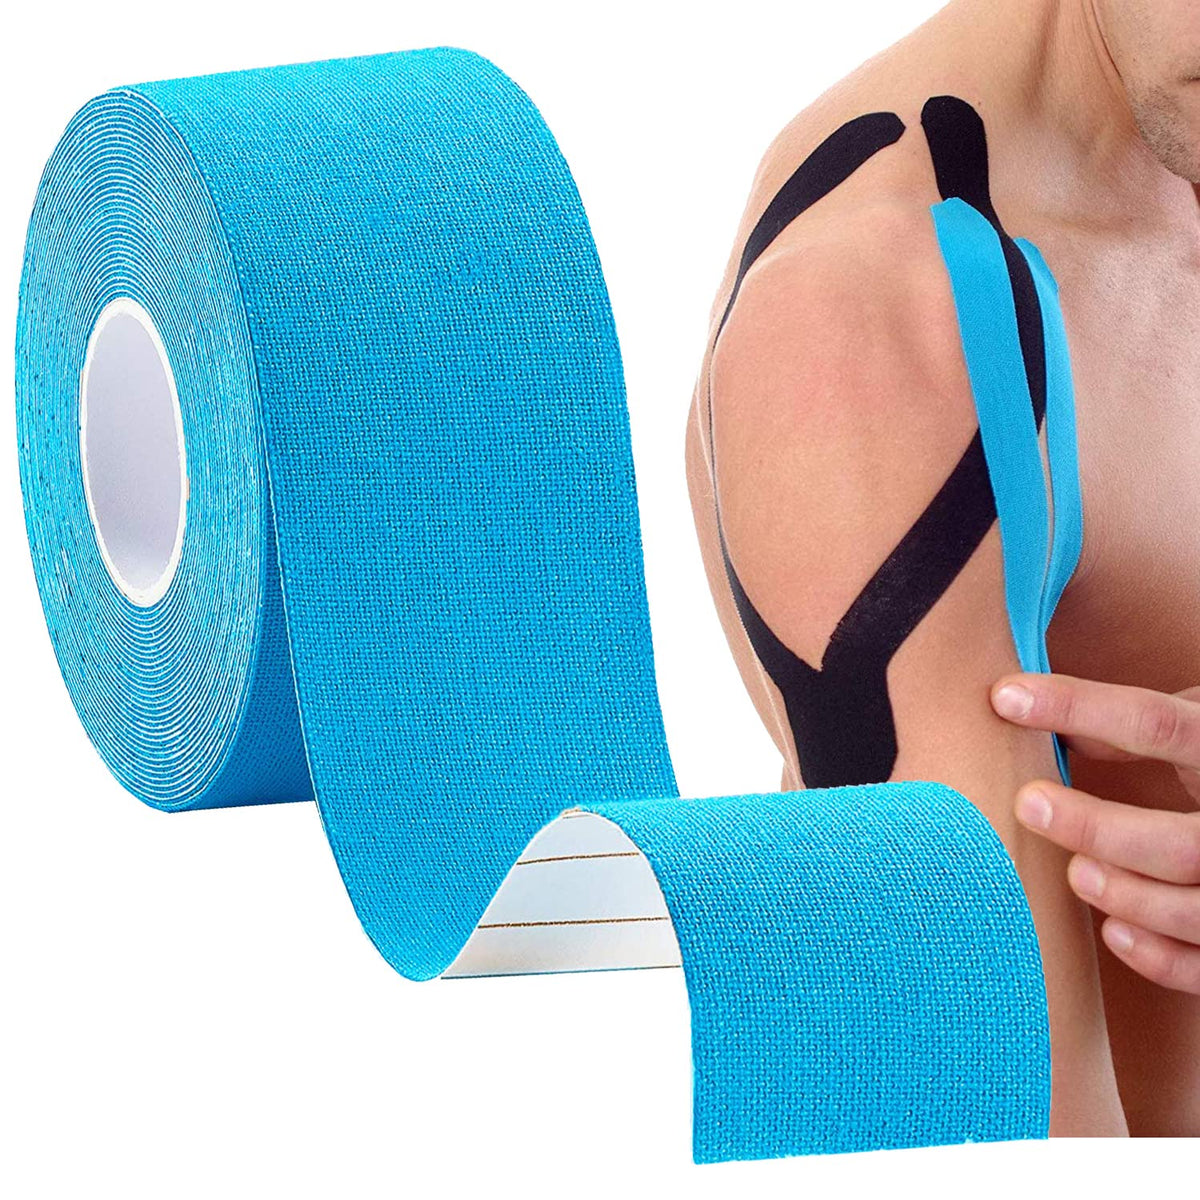 Strauss Kinesiology Sports Tape Knee, Calf & Thigh Support (Sky Blue)